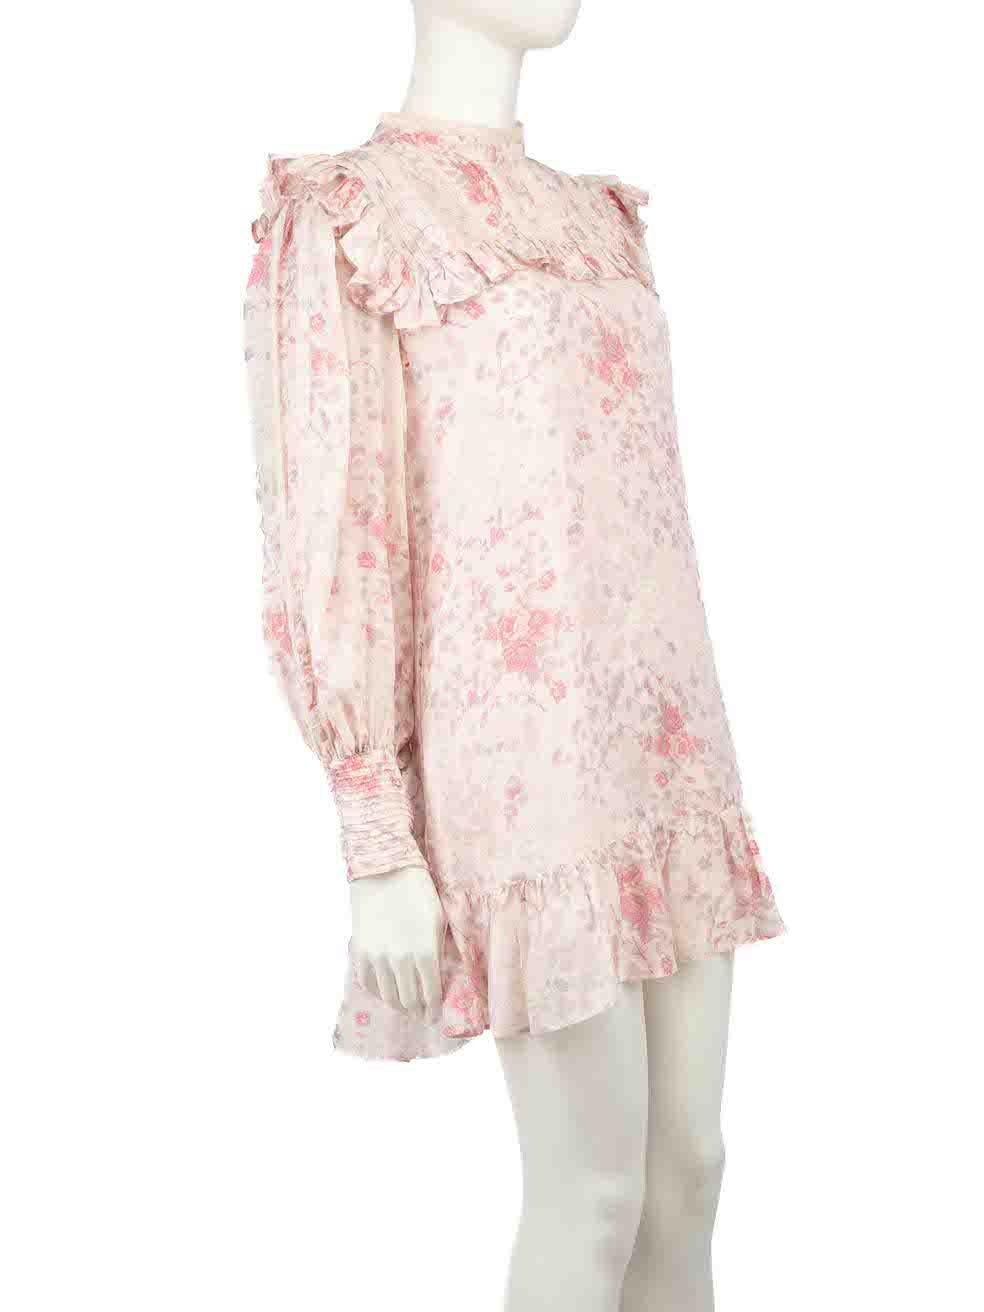 CONDITION is Very good. Minimal wear to dress is evident. Minimal pull thread to right underarm. Minimal marks to rear hemline of lining on this used LoveShackFancy designer resale item.
 
 
 
 Details
 
 
 Pink
 
 Silk
 
 Dress
 
 Floral print
 
